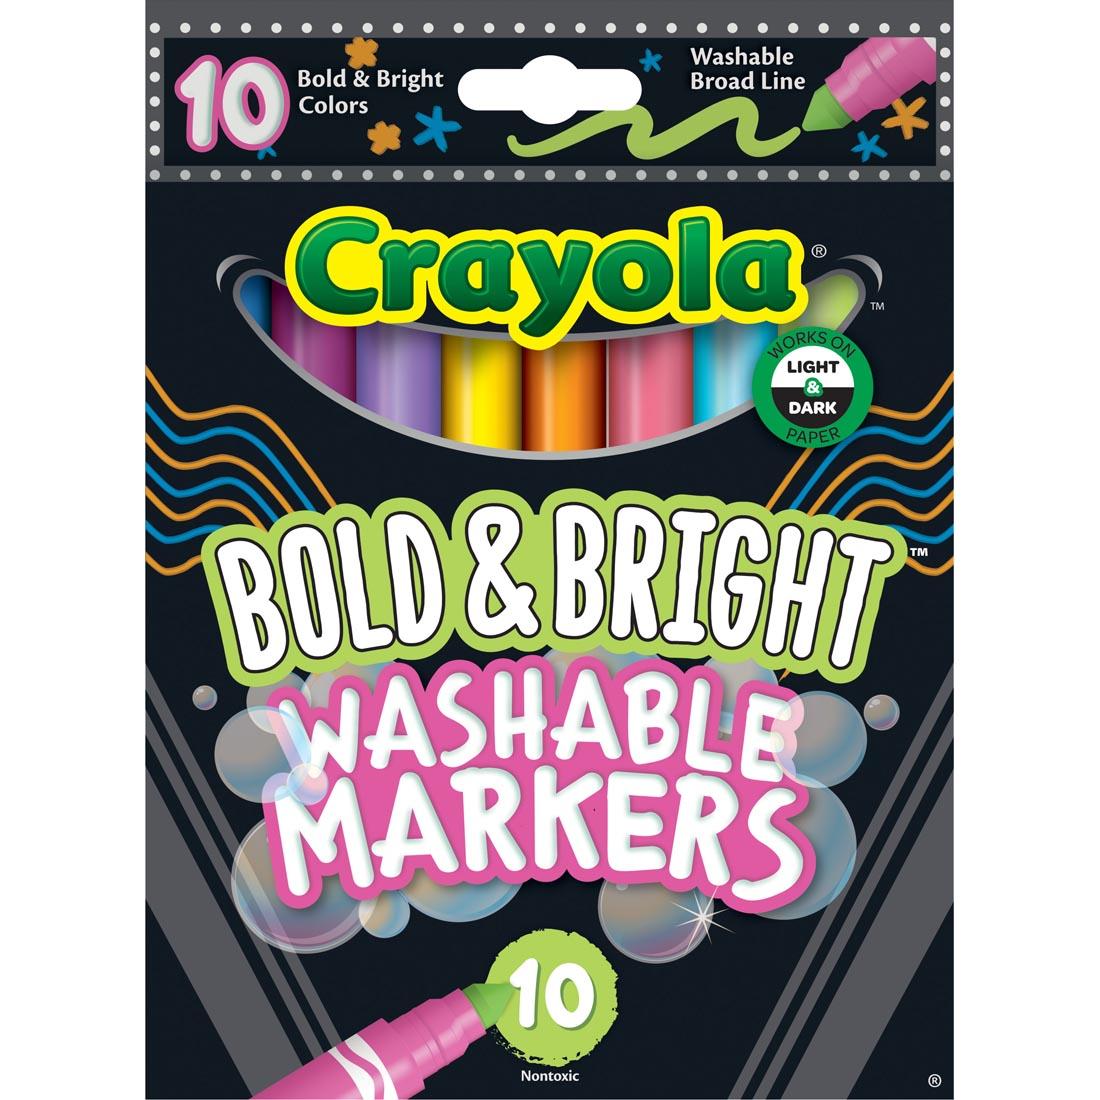 Crayola Bold & Bright Washable Broad Line Markers 10-Color Set